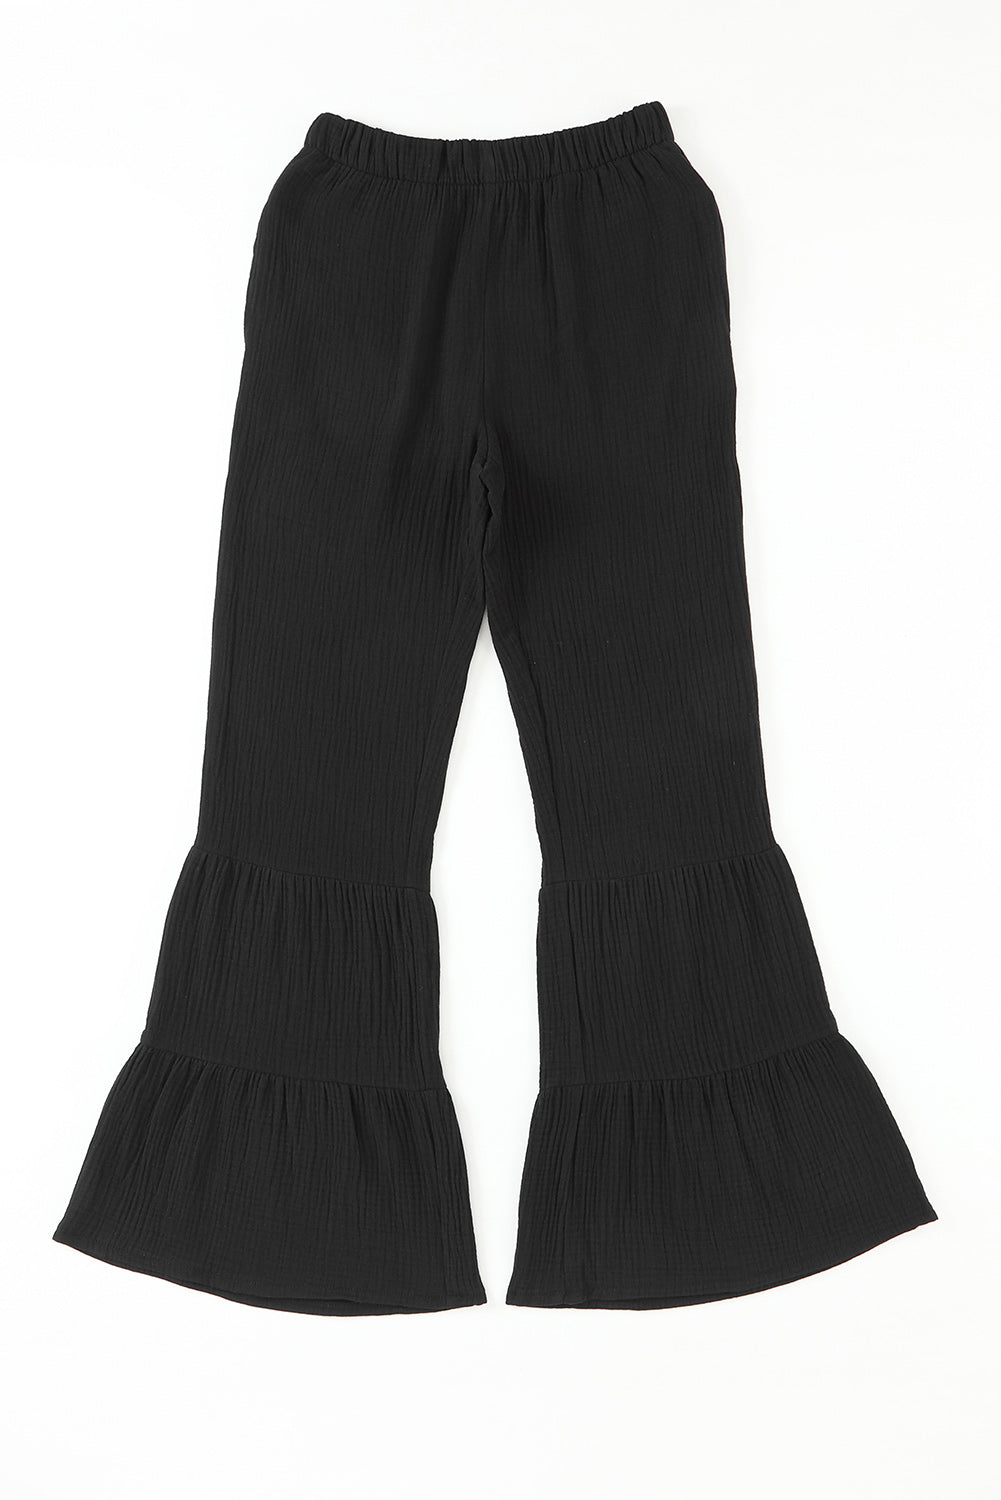 Long Flare Pants with Pocket Print on any thing USA/STOD clothes